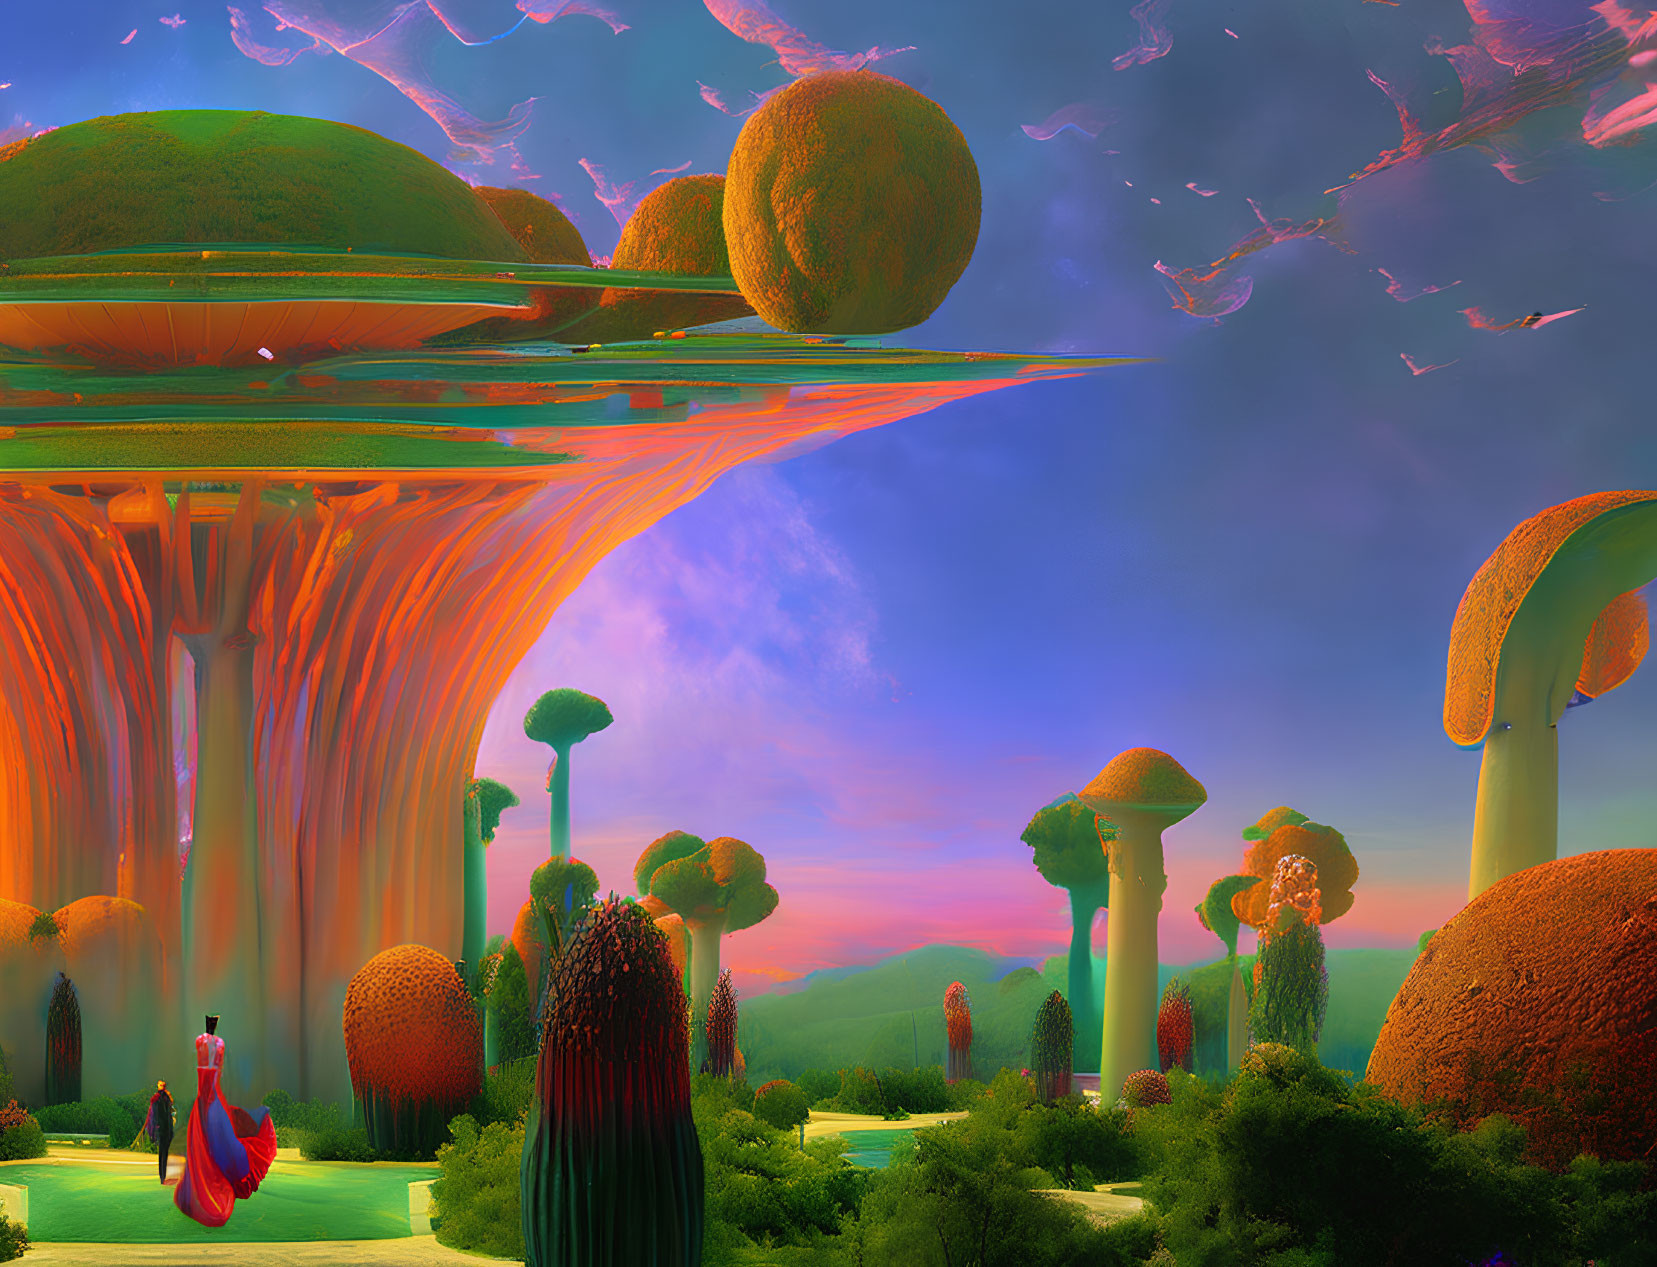 Fantastical landscape with mushroom structures and person in red dress under pink sky